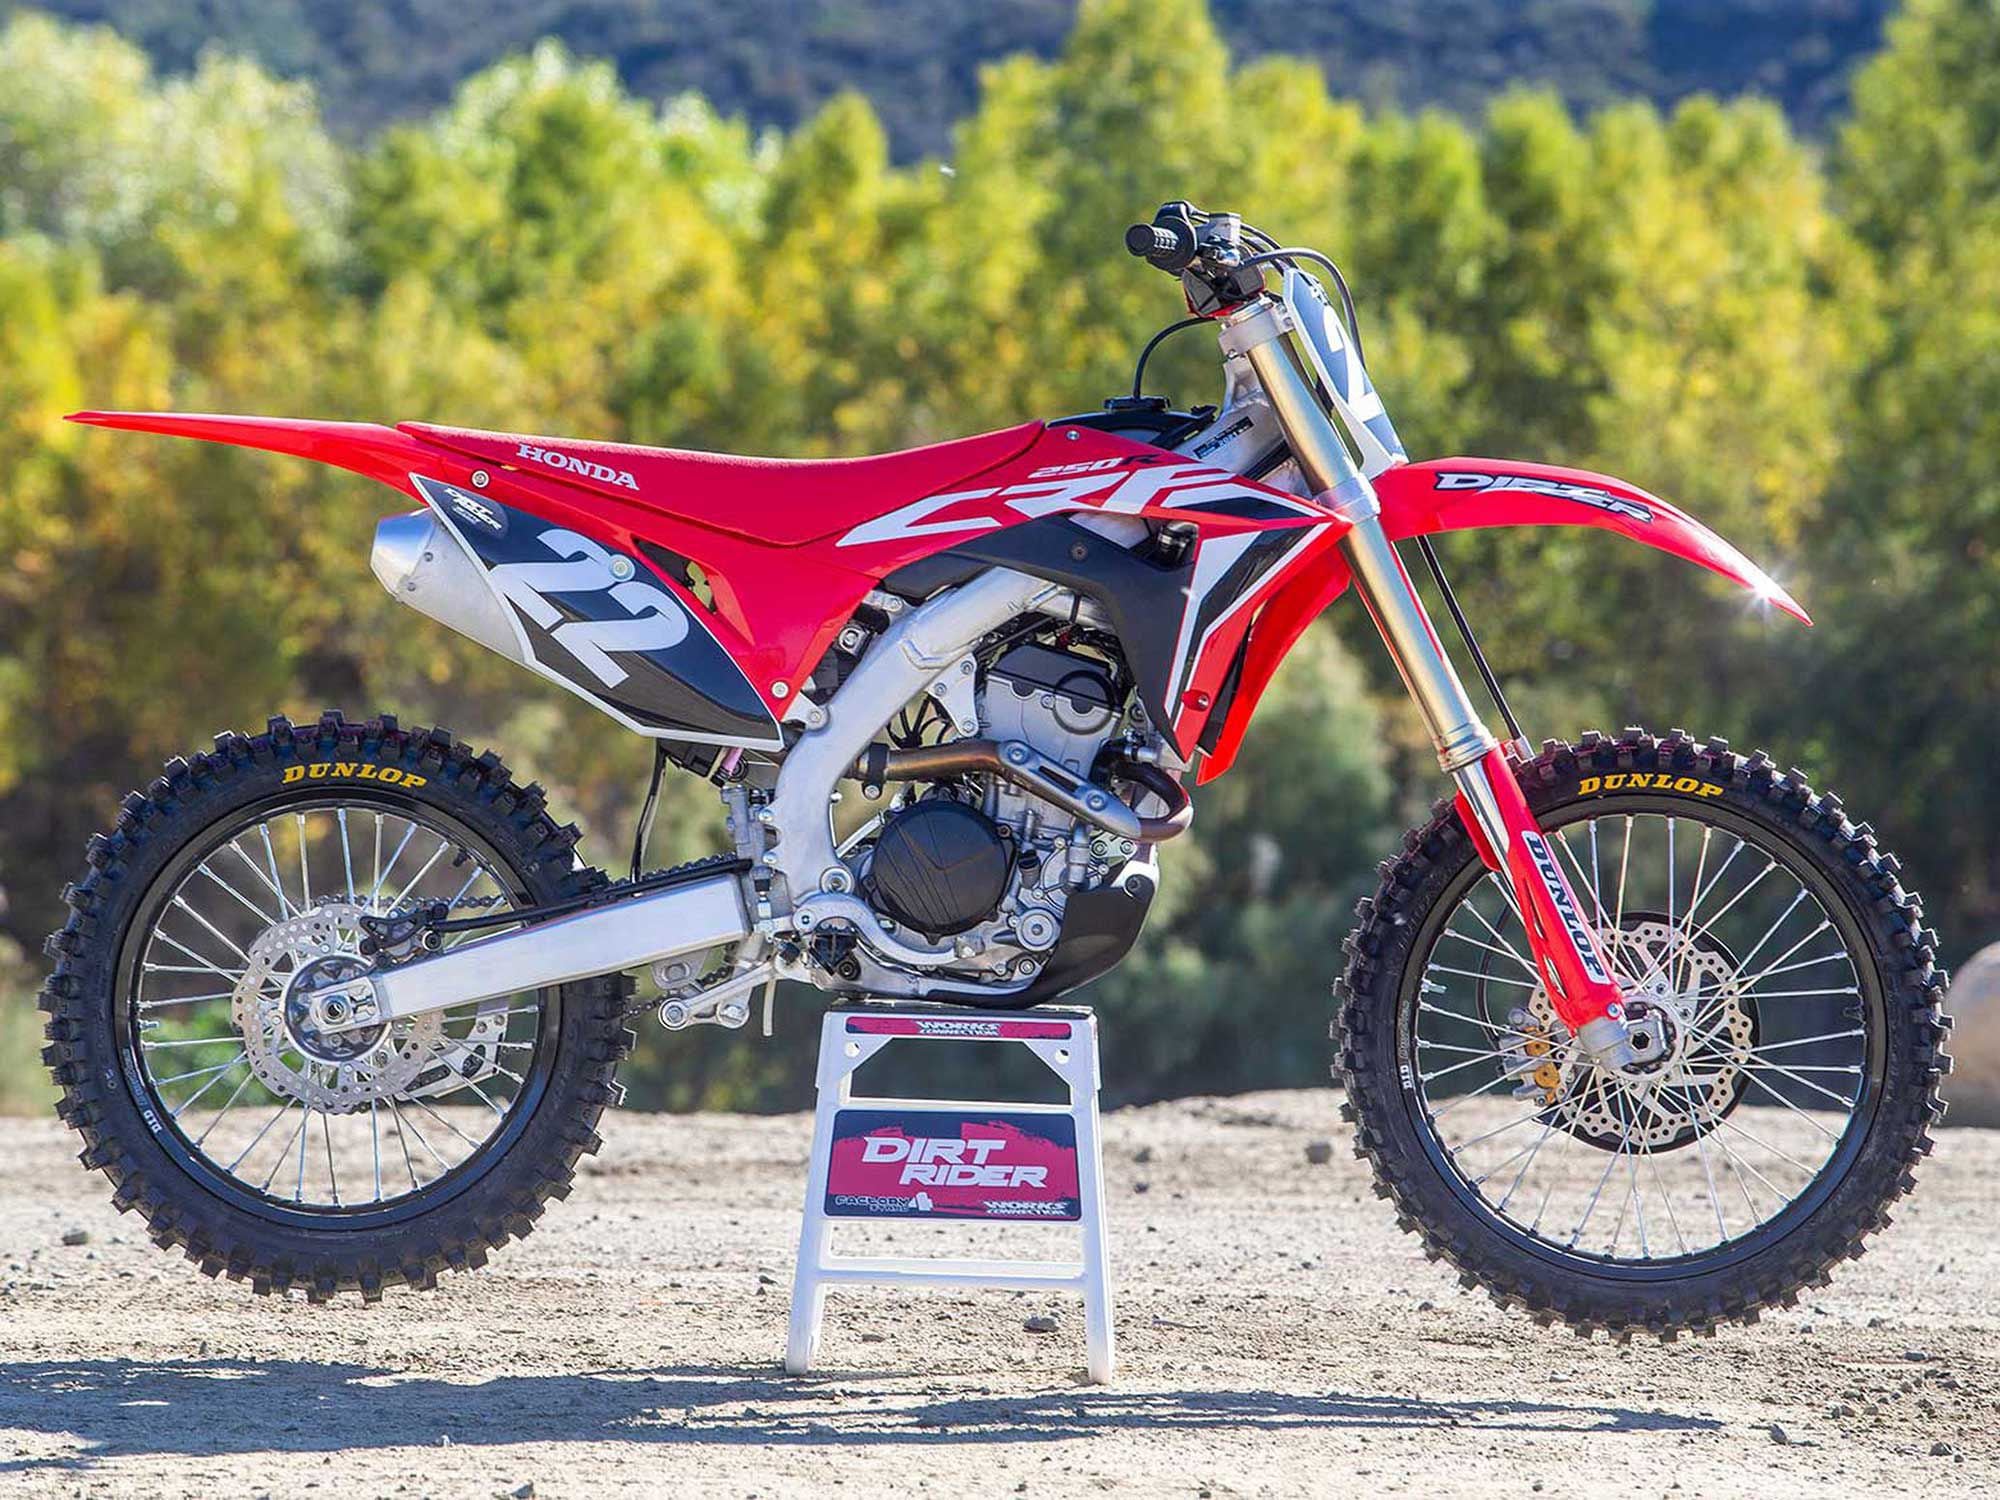 2021 Honda Crf250R Buyer'S Guide: Specs, Photos, Price | Cycle World